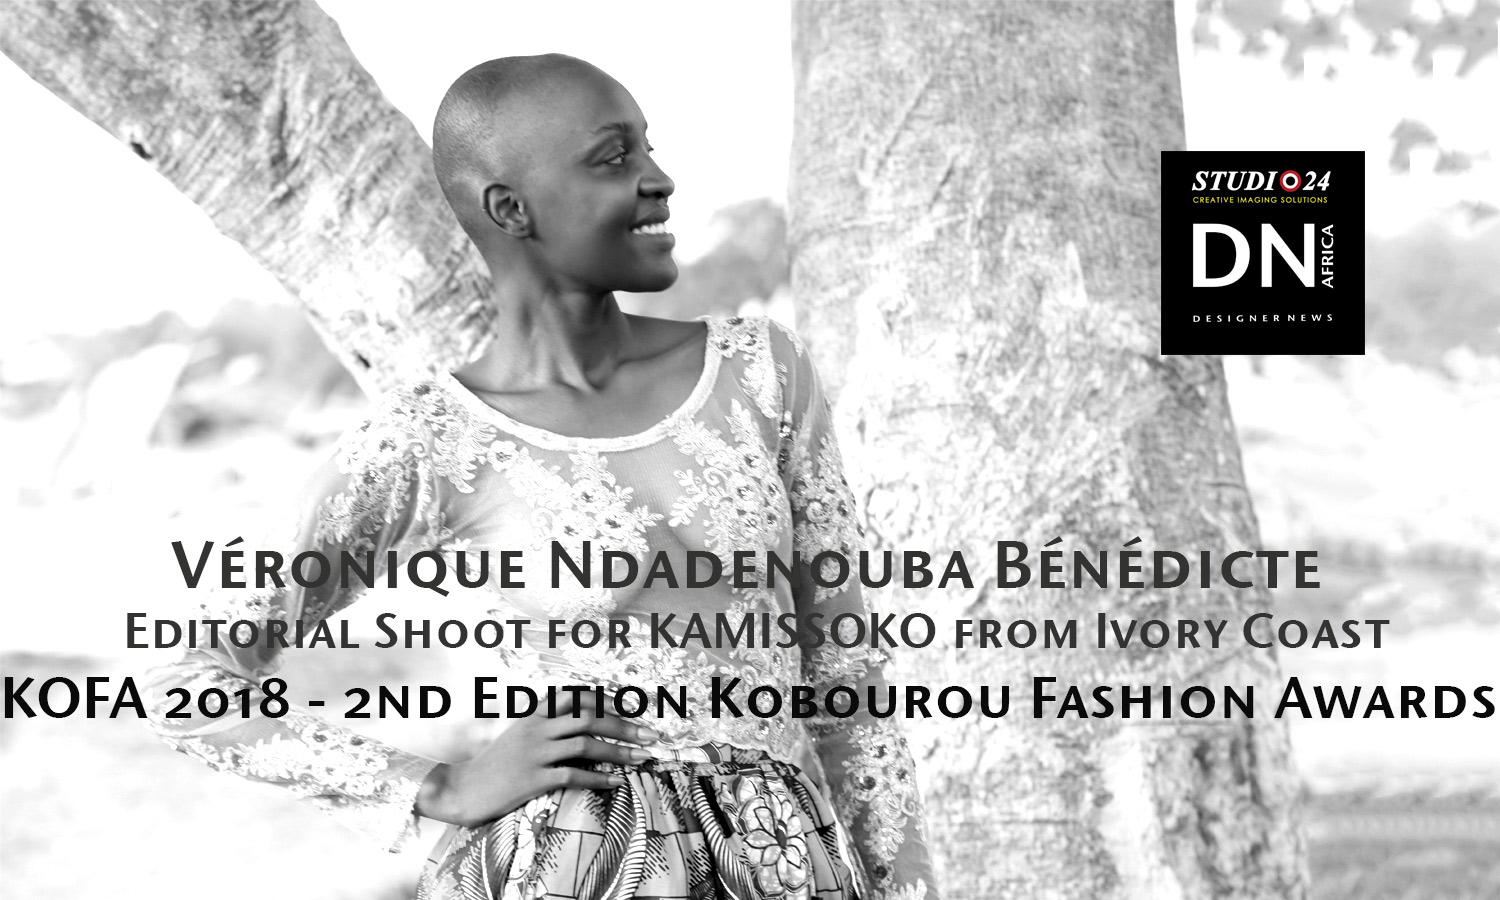 AFRICA FASHION STYLE MAGAZINE - KOFA 2nd Edition Organized by Hal Ebene Kobourou Fashion Awards from Parakou (Benin) – Designer KAMISSOKO from Ivory Coast by Ibrahim KAMISSOKO - Model VÉRONIQUE NDADENOUBA BÉNÉDICTE from Chad – Exclusive contents for DN AFRICA and STUDIO 24 NIGERIA